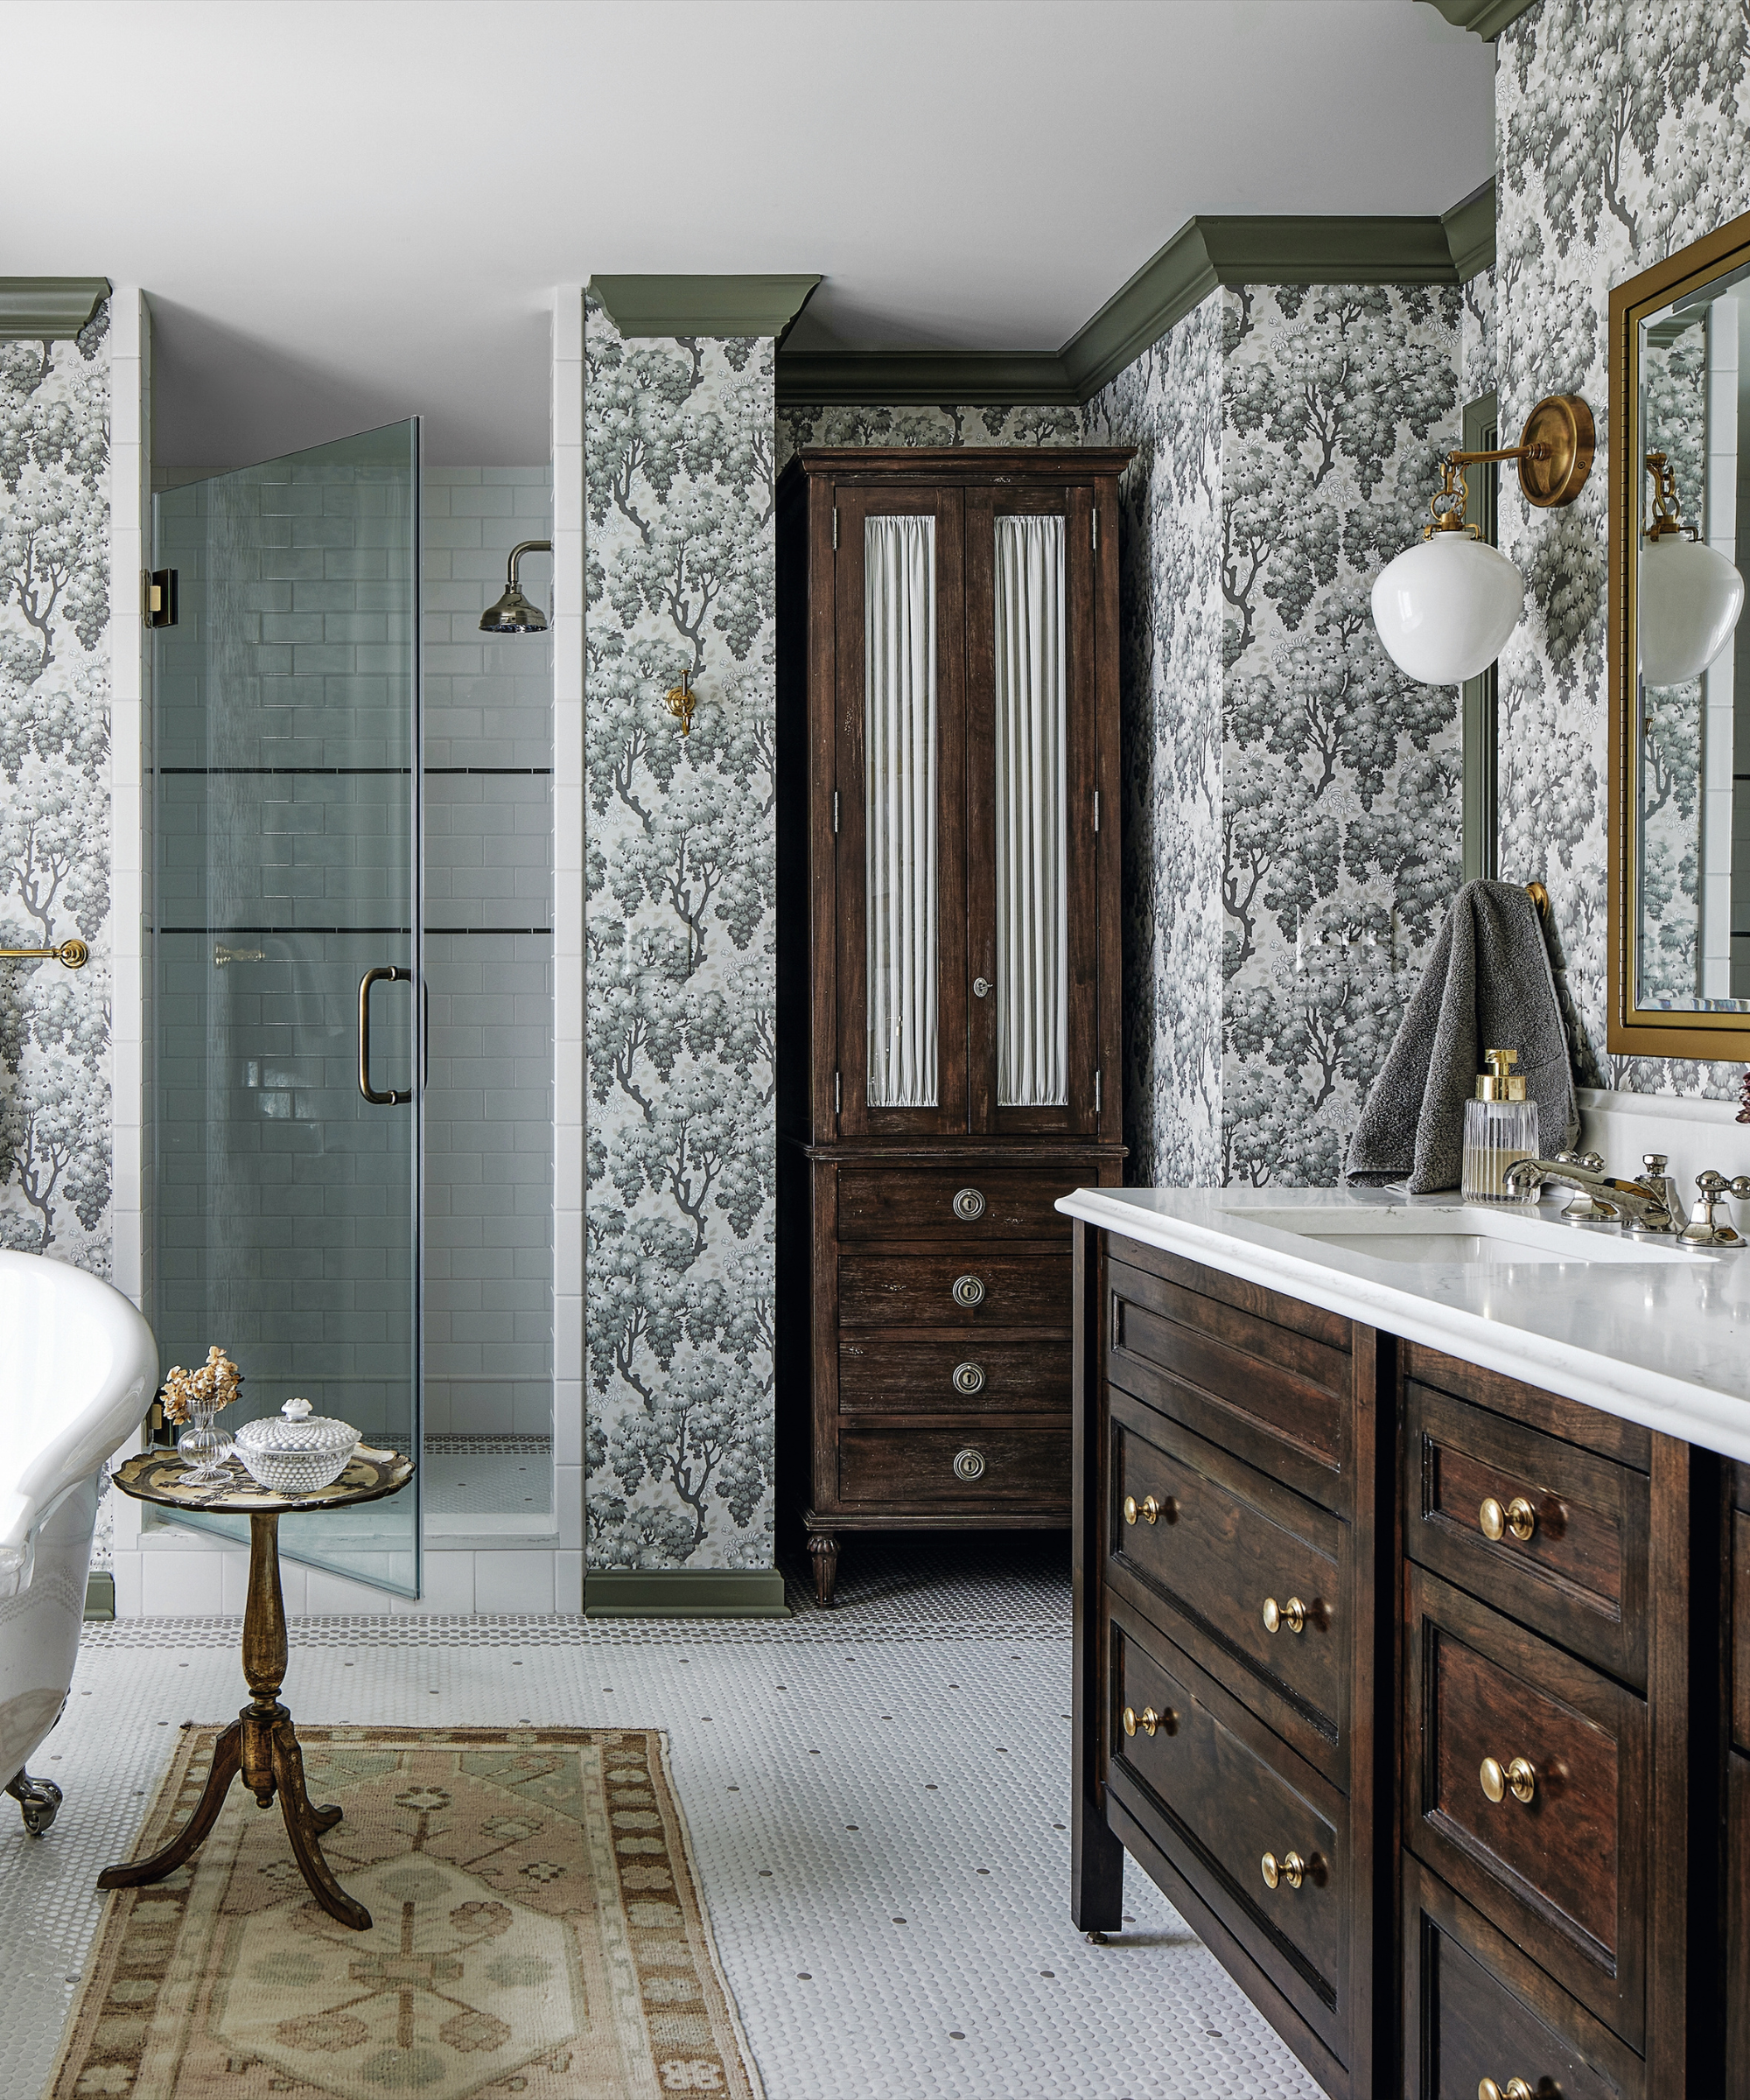 Bathroom with patterned wallpaper and dark wood cabinet and sink uinit and freestanding white bath